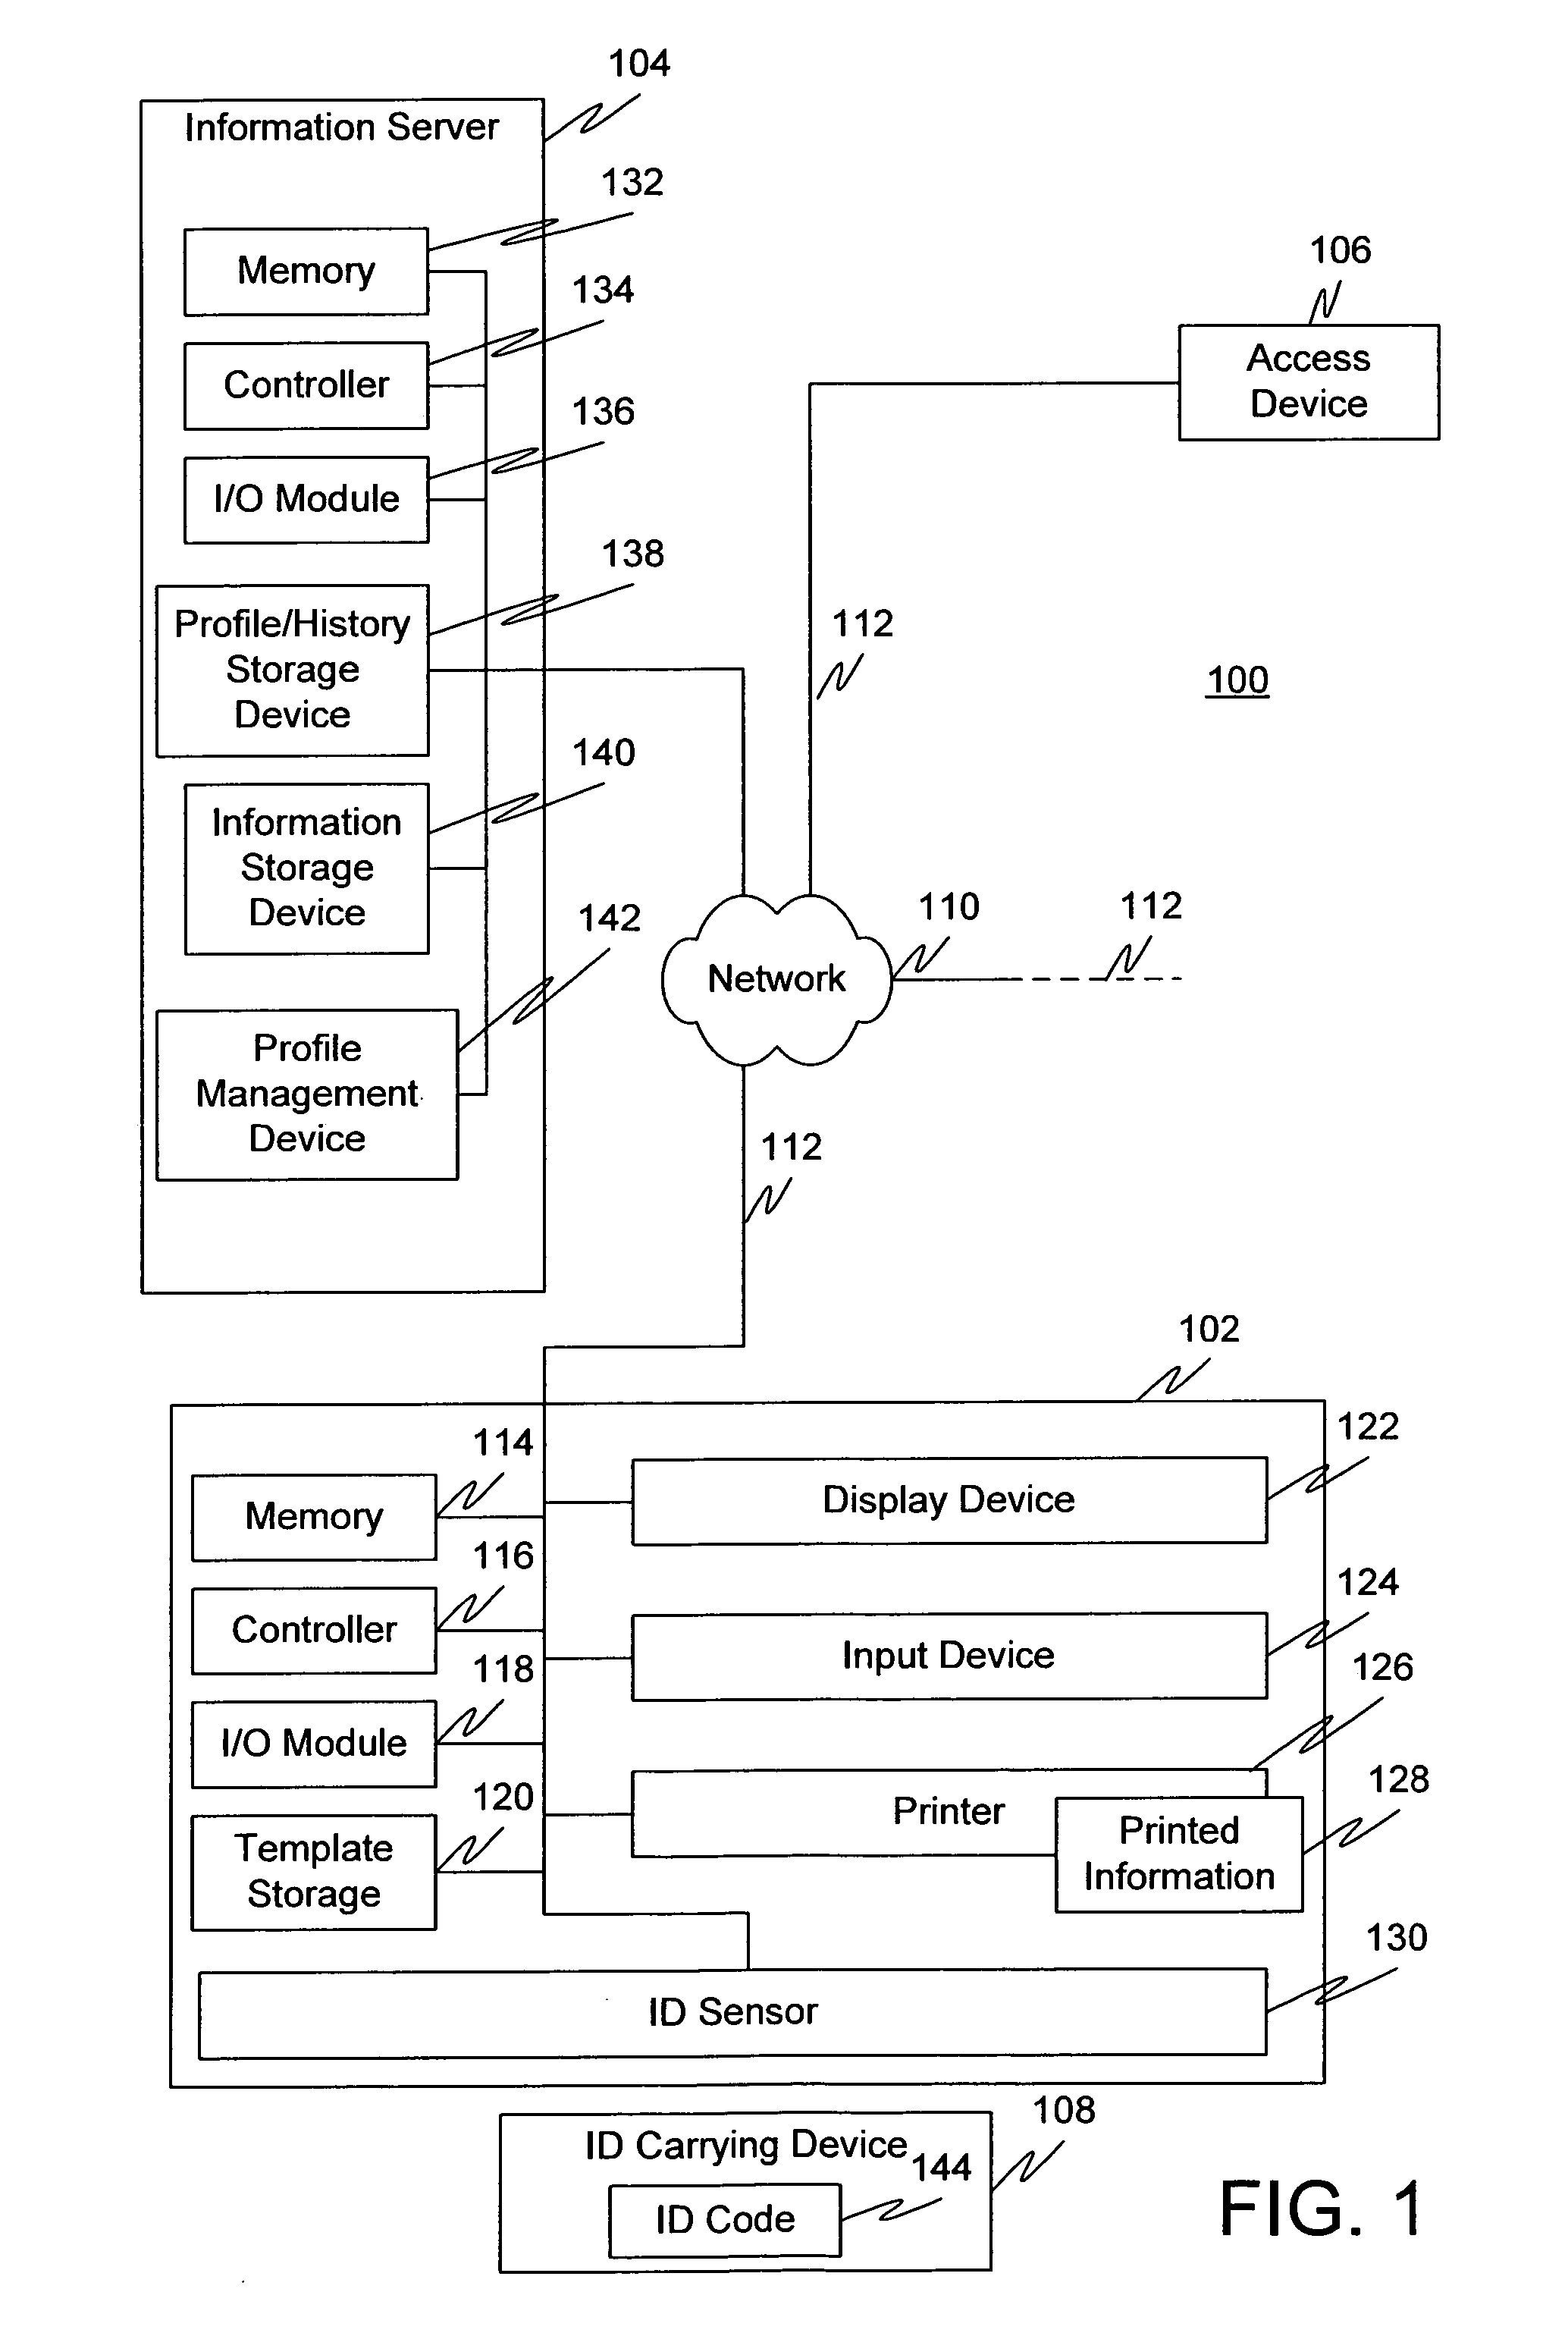 Systems and methods for the identification and presenting of information